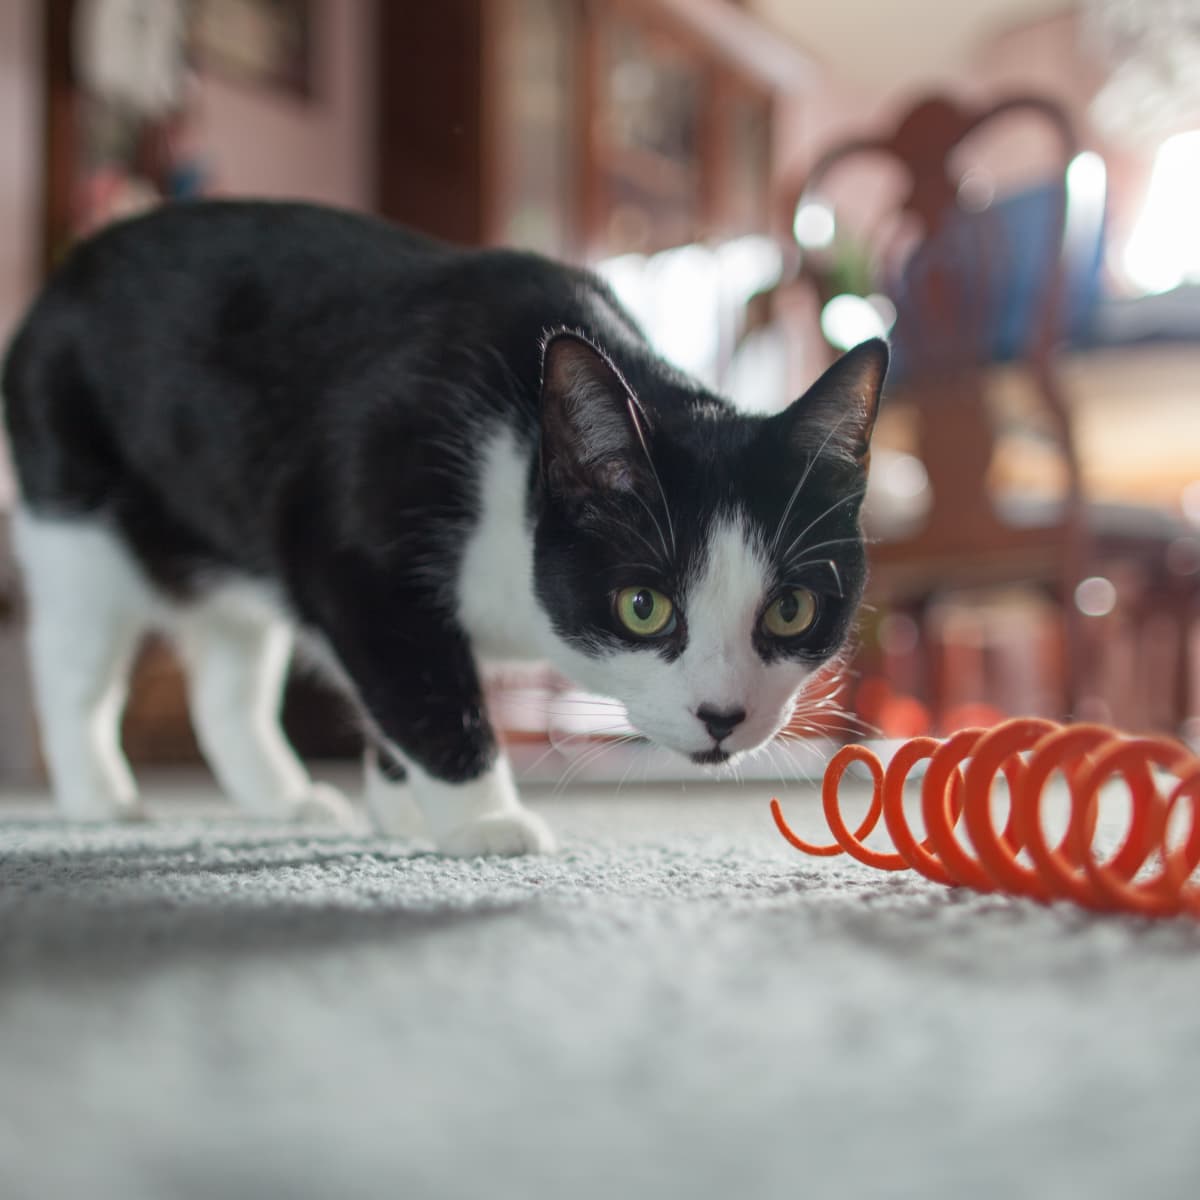 8 Easy DIY Cat Toys [+ Cat Toy Safety Guide]